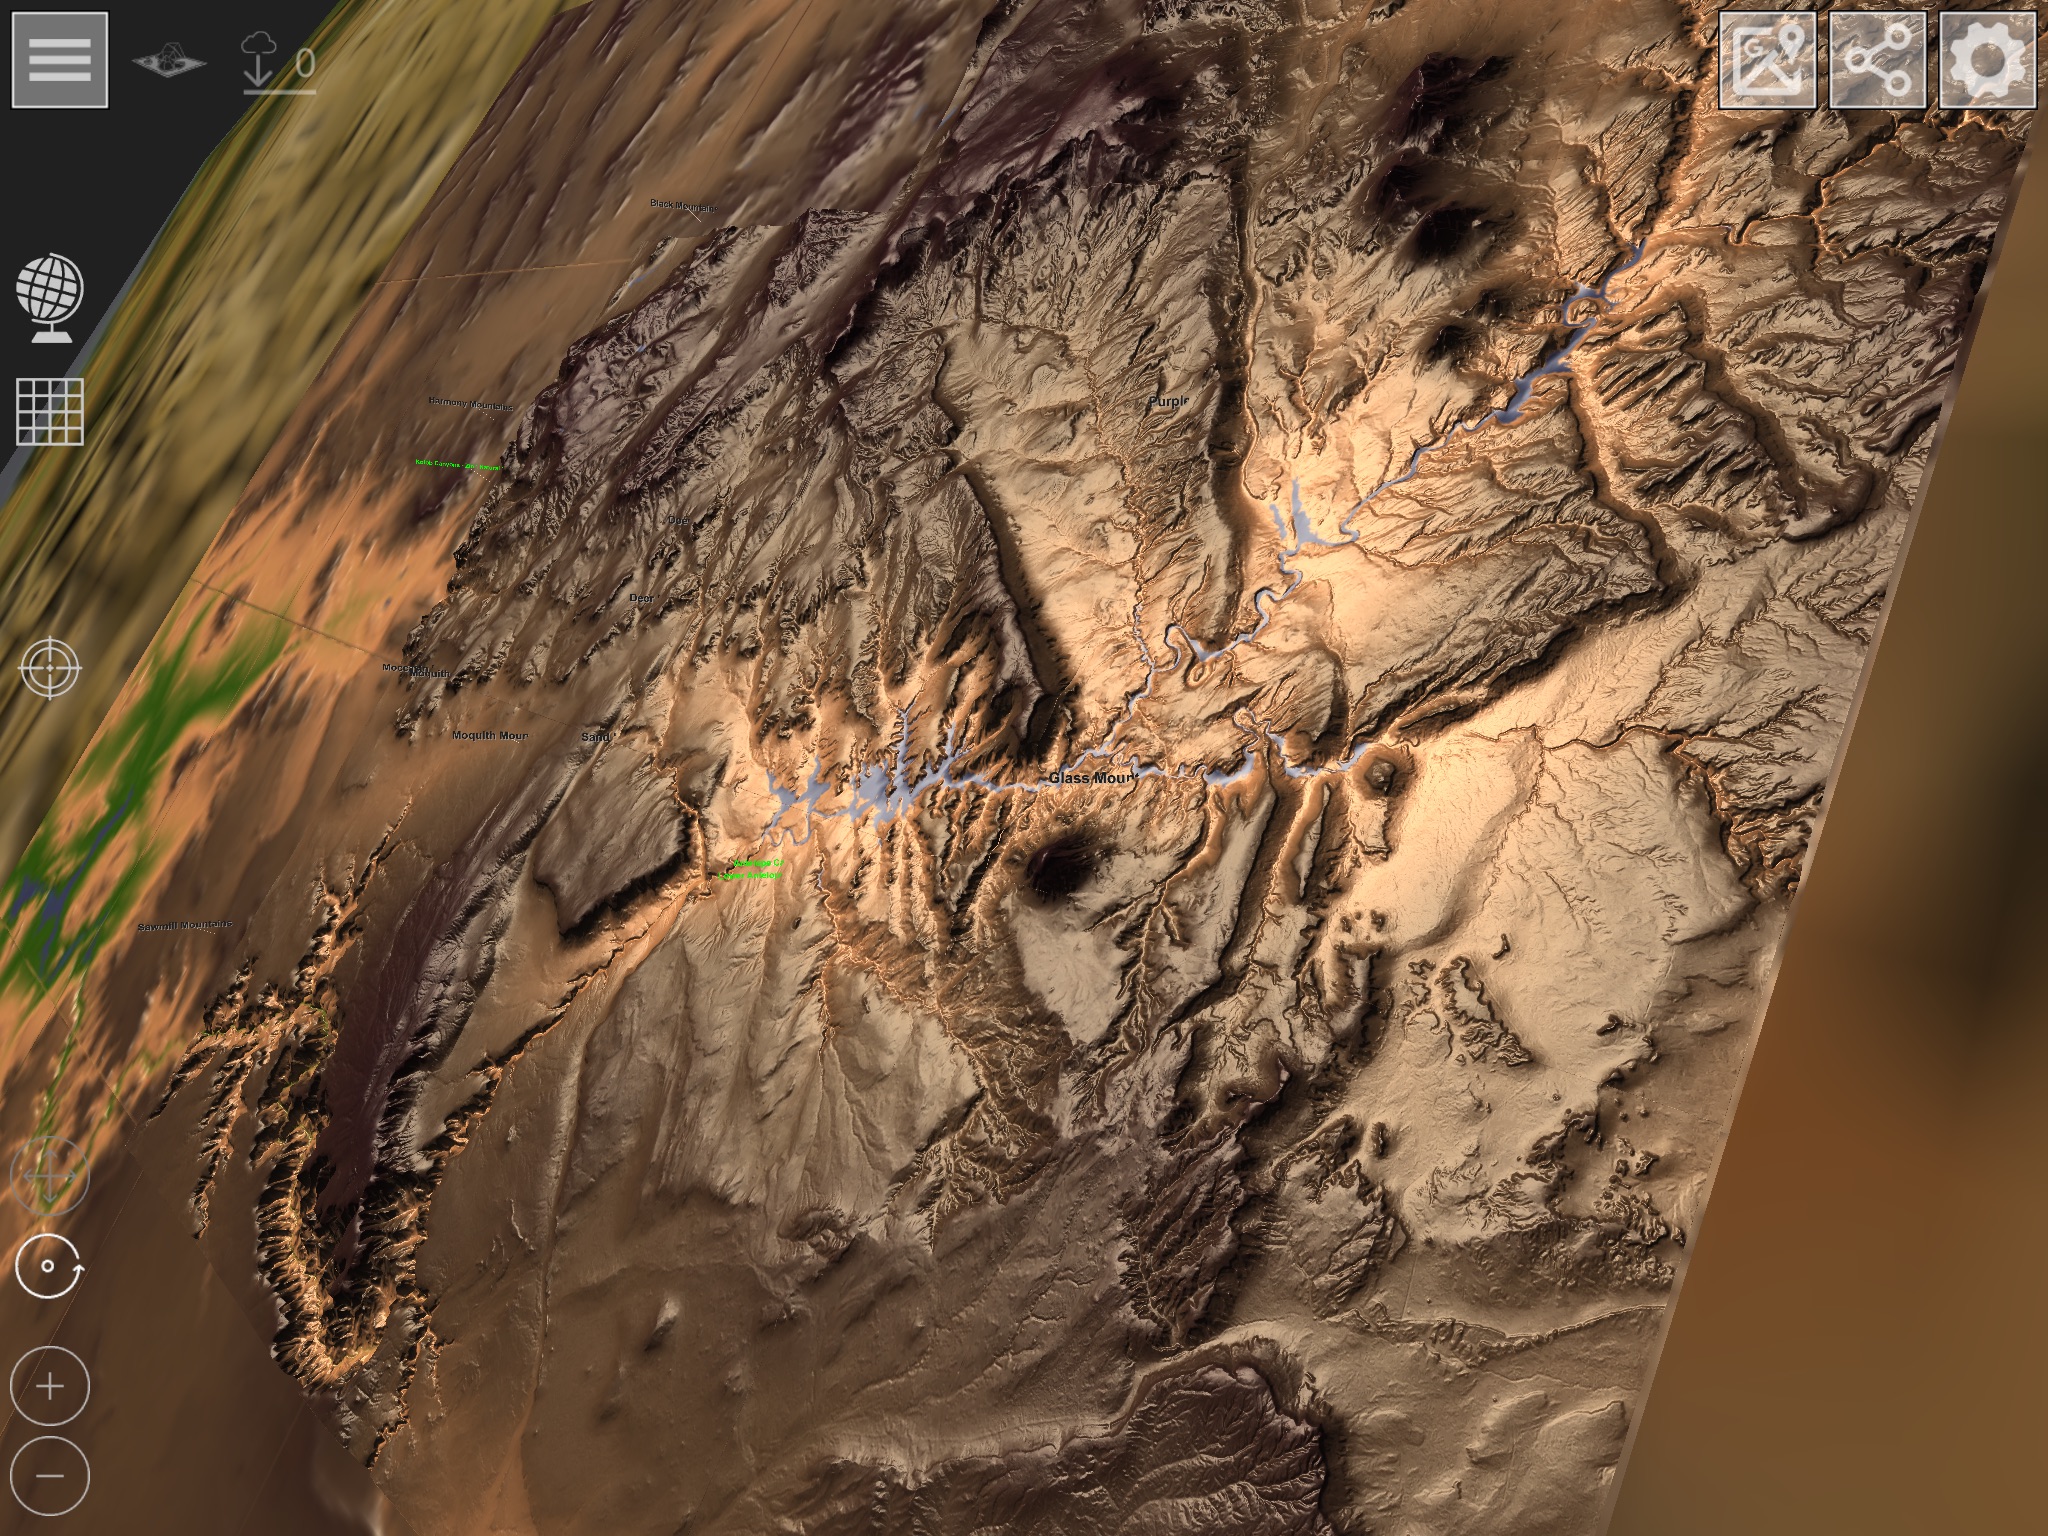 GlobeViewer: Display of the rectified 3D map on the globe